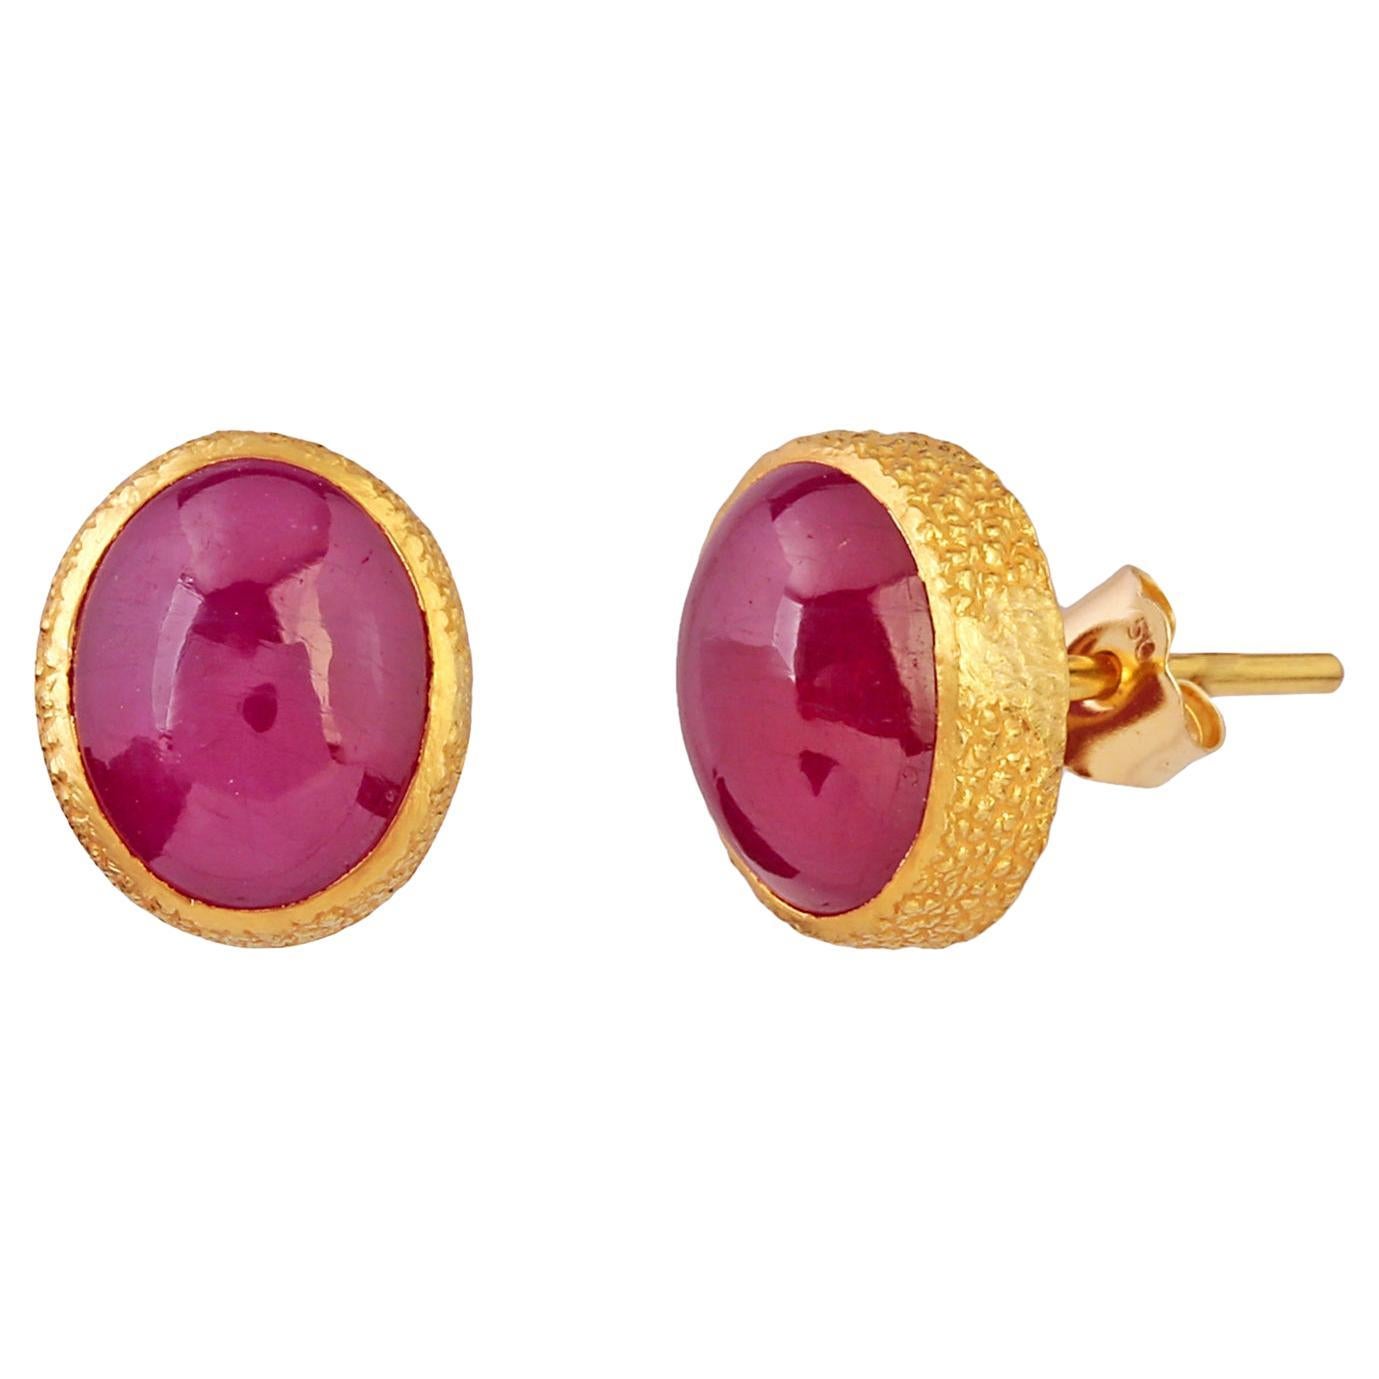 Ruby Stud Earrings with 18k Gold For Sale